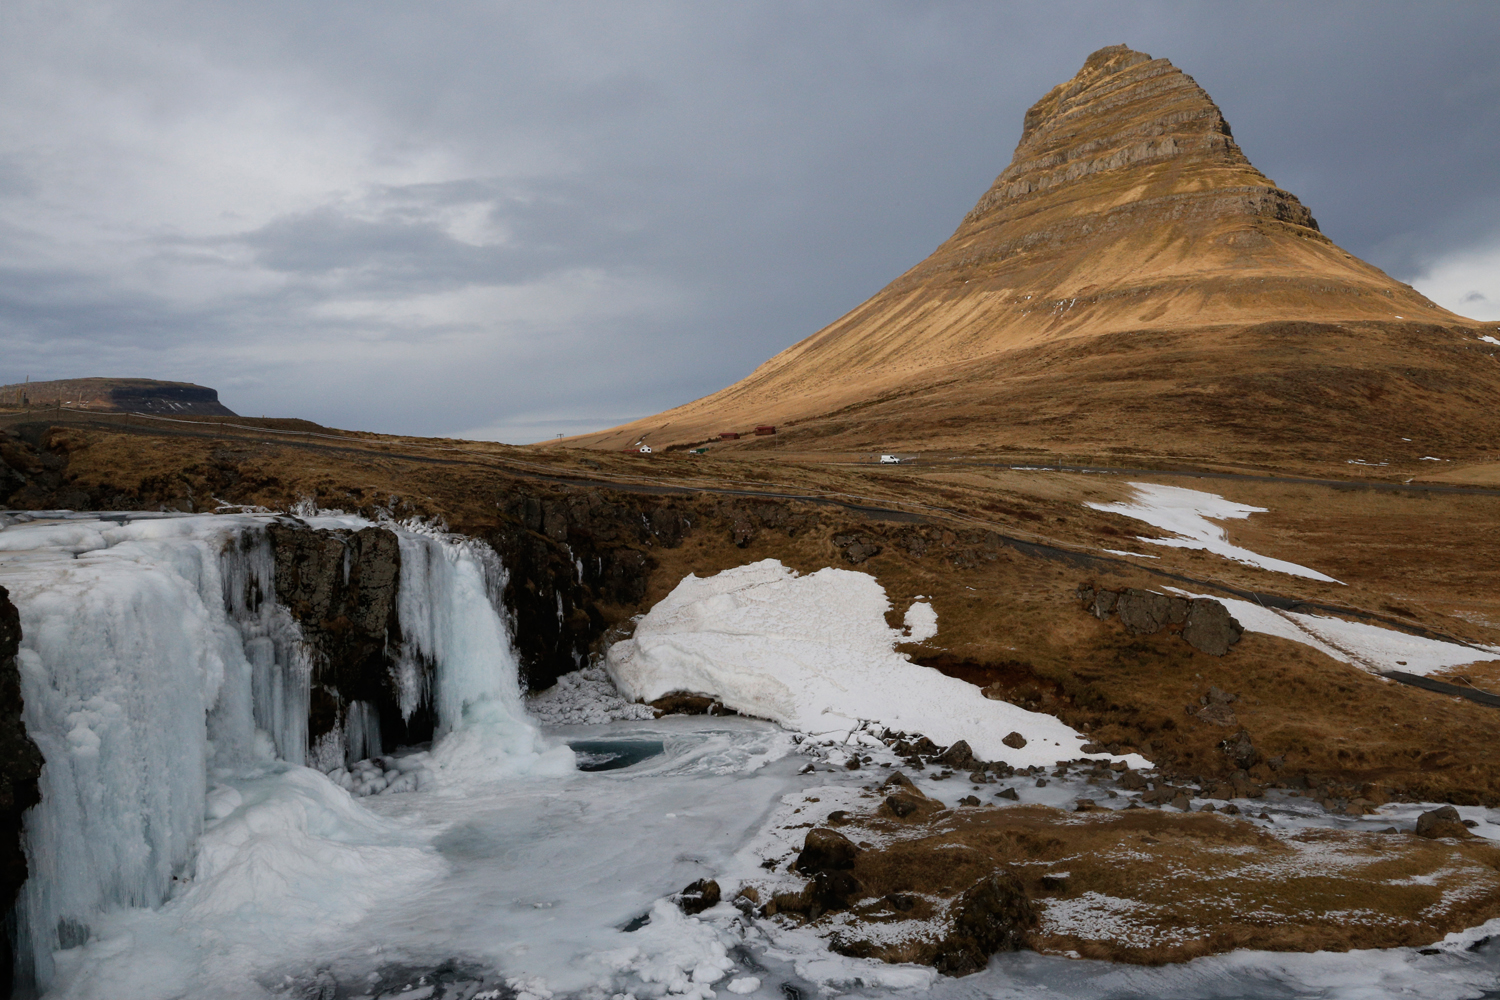 A view of Mount Kirkjufell and Kirkjufellsfoss waterfall, which is mostly frozen. It is a peaceful scene, although some faint rays of sunlight are contrasted with dark silver clouds.